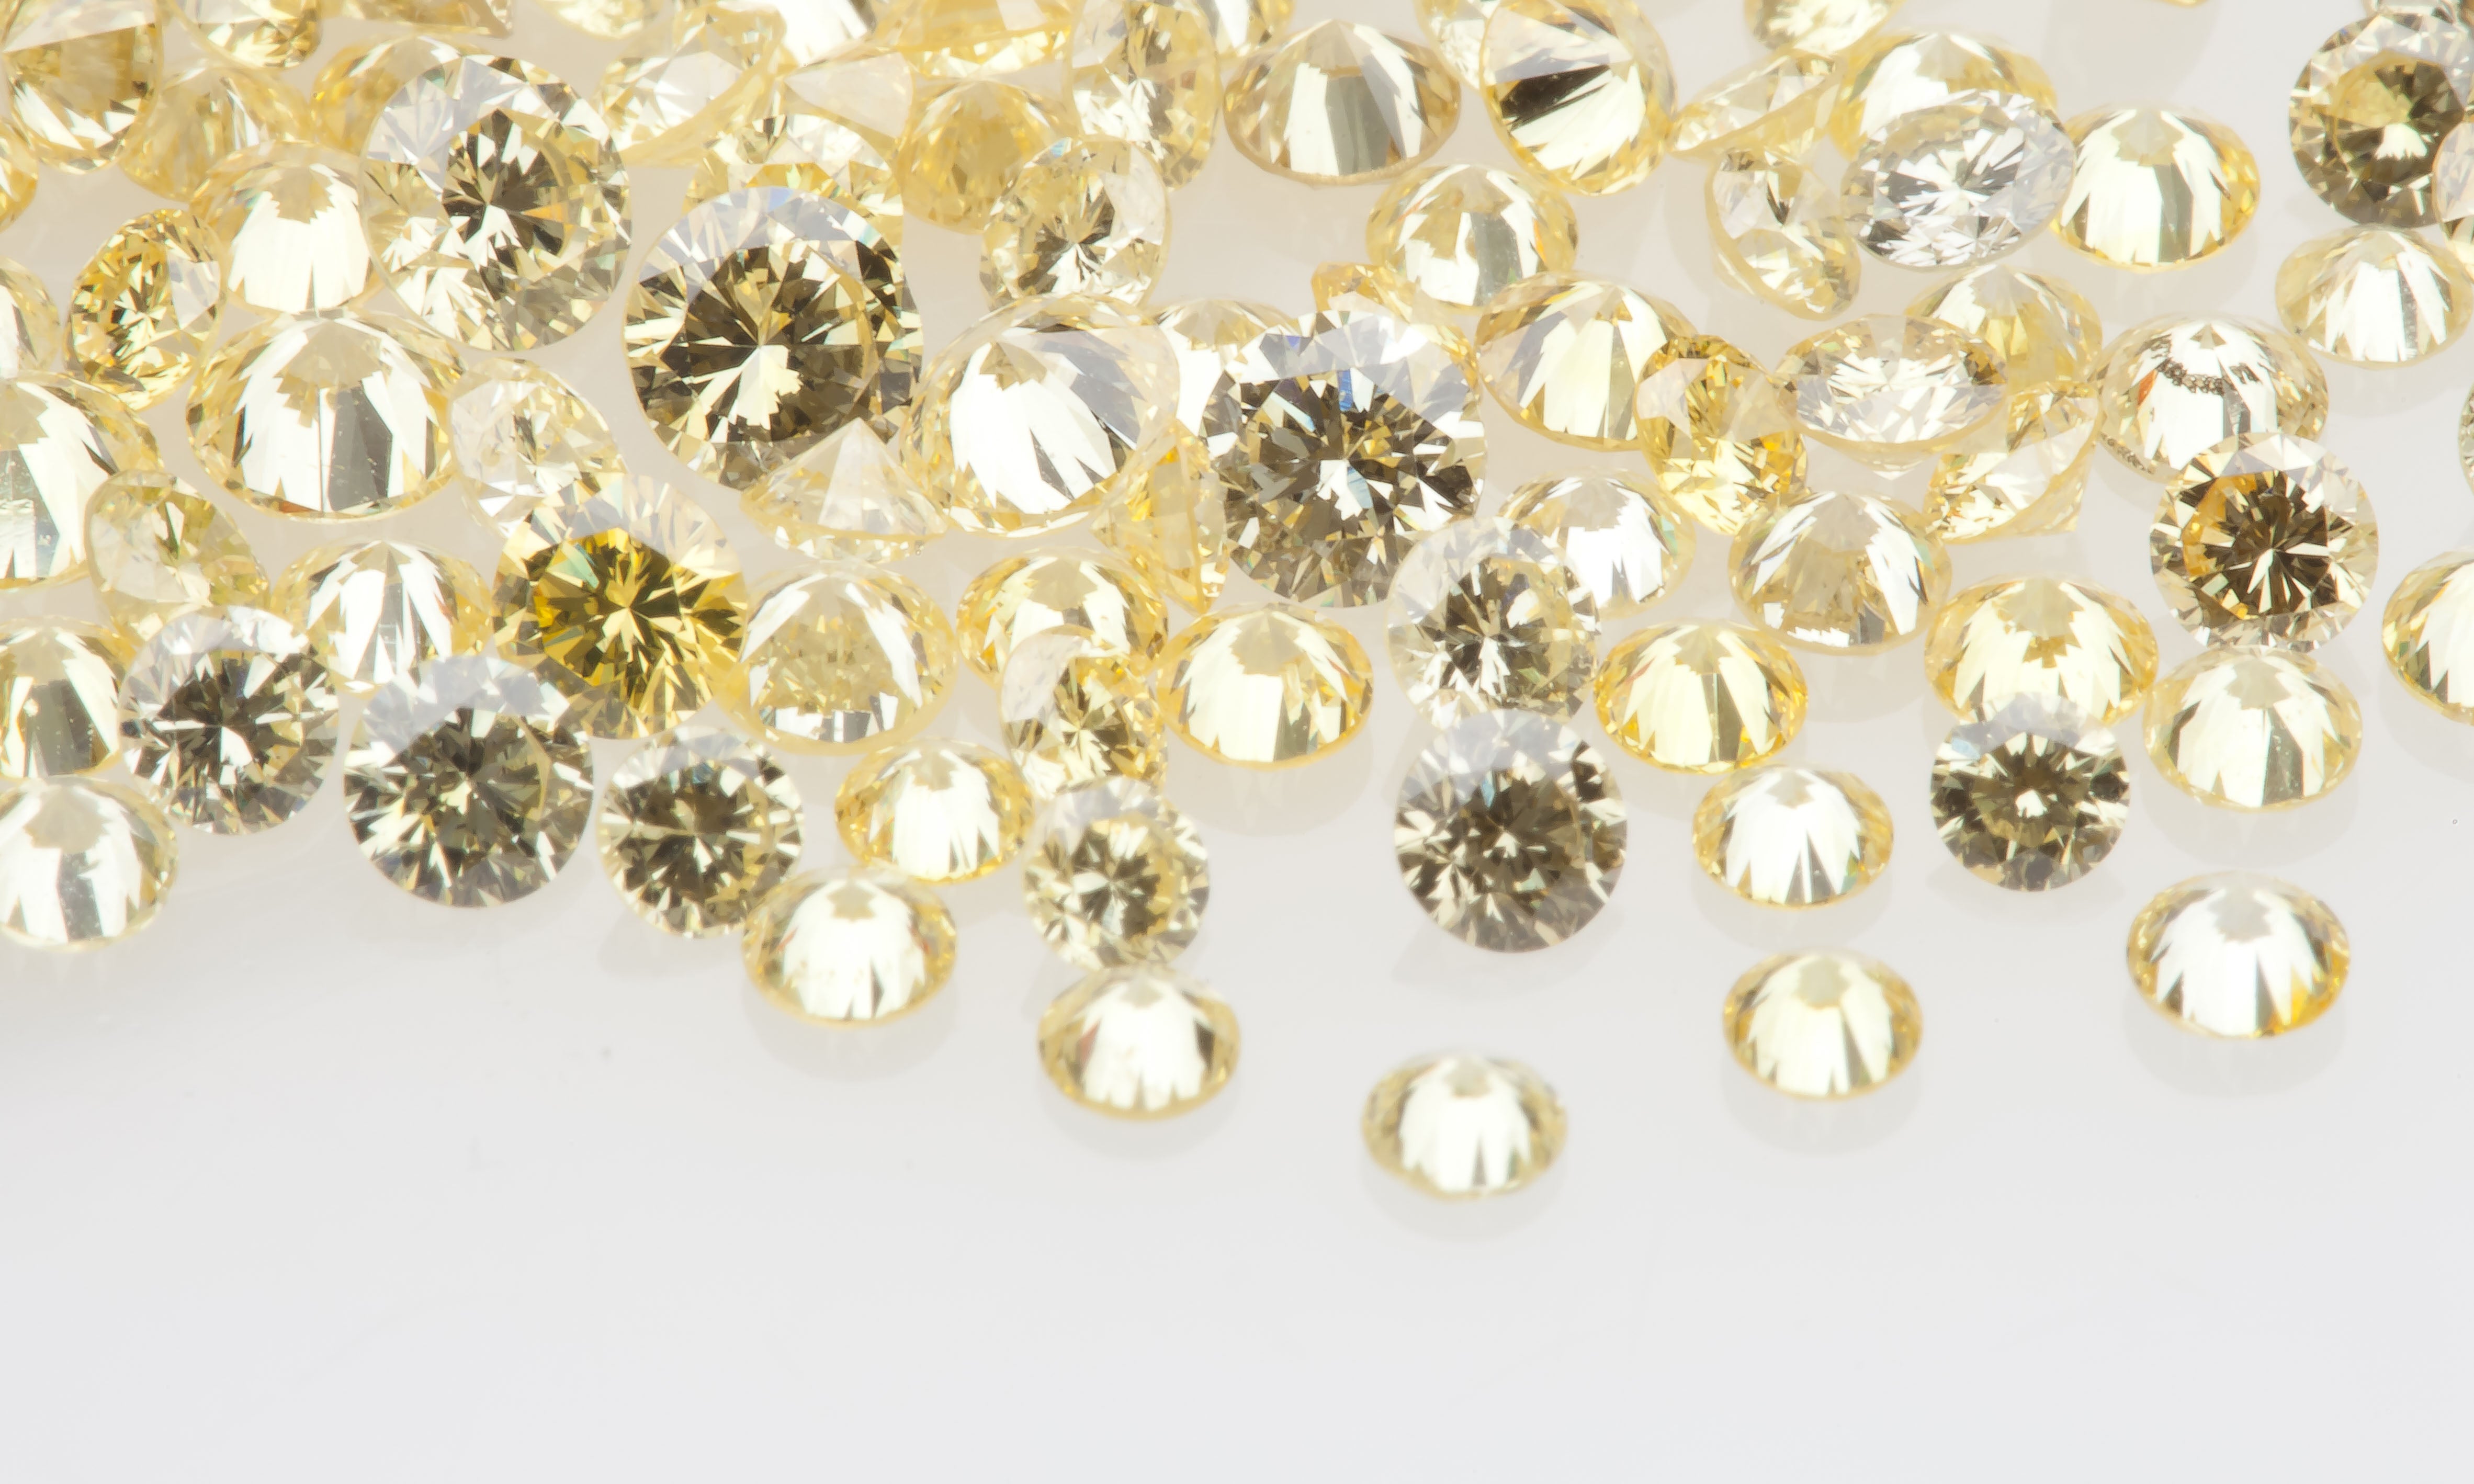 Diamond Services Introduces New Technique to Detect Rough and Polished Lab-grown Yellow Diamonds